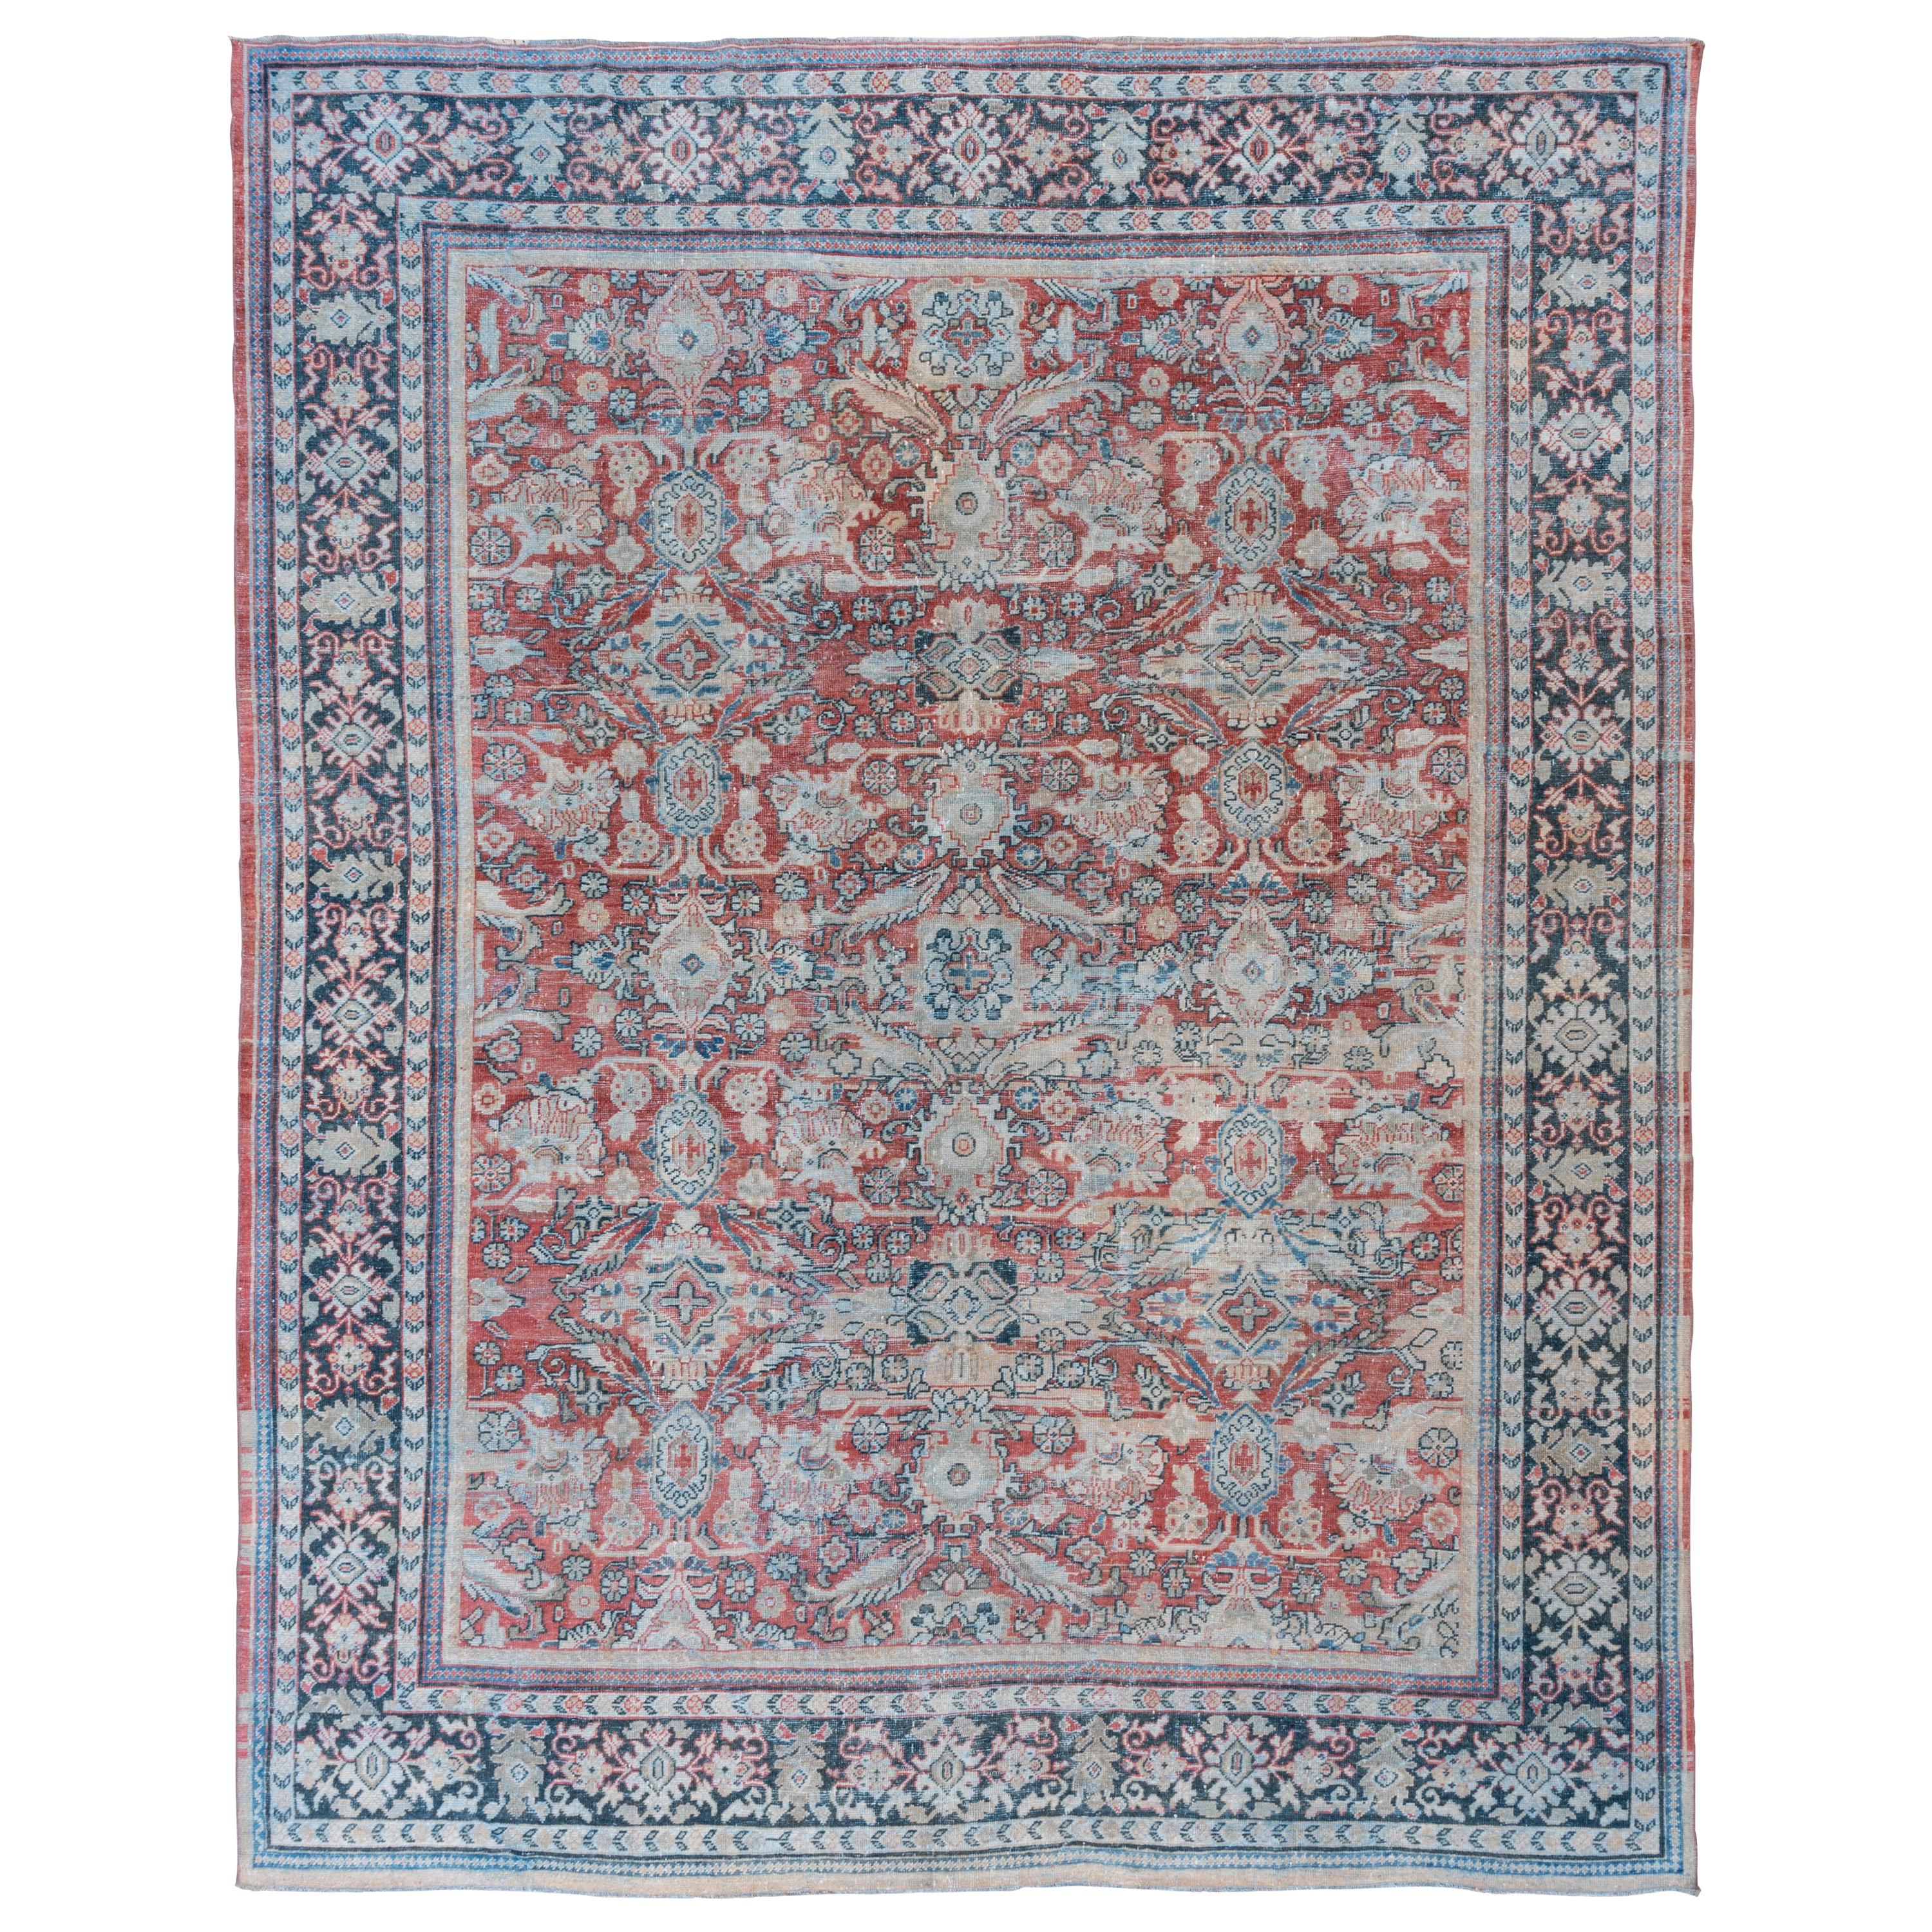 Lightly Distressed Antique Red Persian Mahal Rug, Blue Borders, All-Over Field